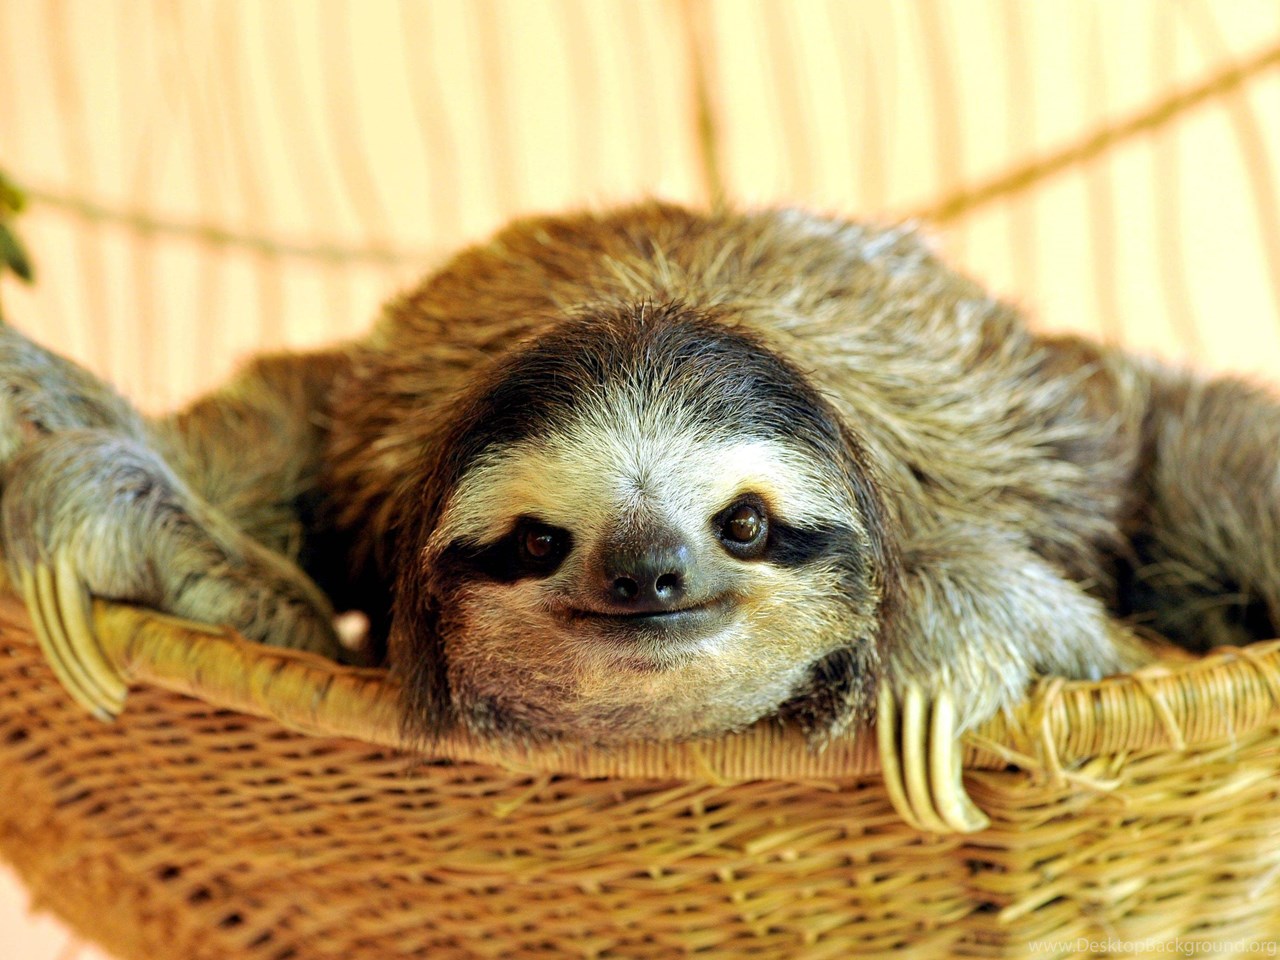 Download Similar Image Search For Post: Buttercup The Sloth Wallpapers ... 